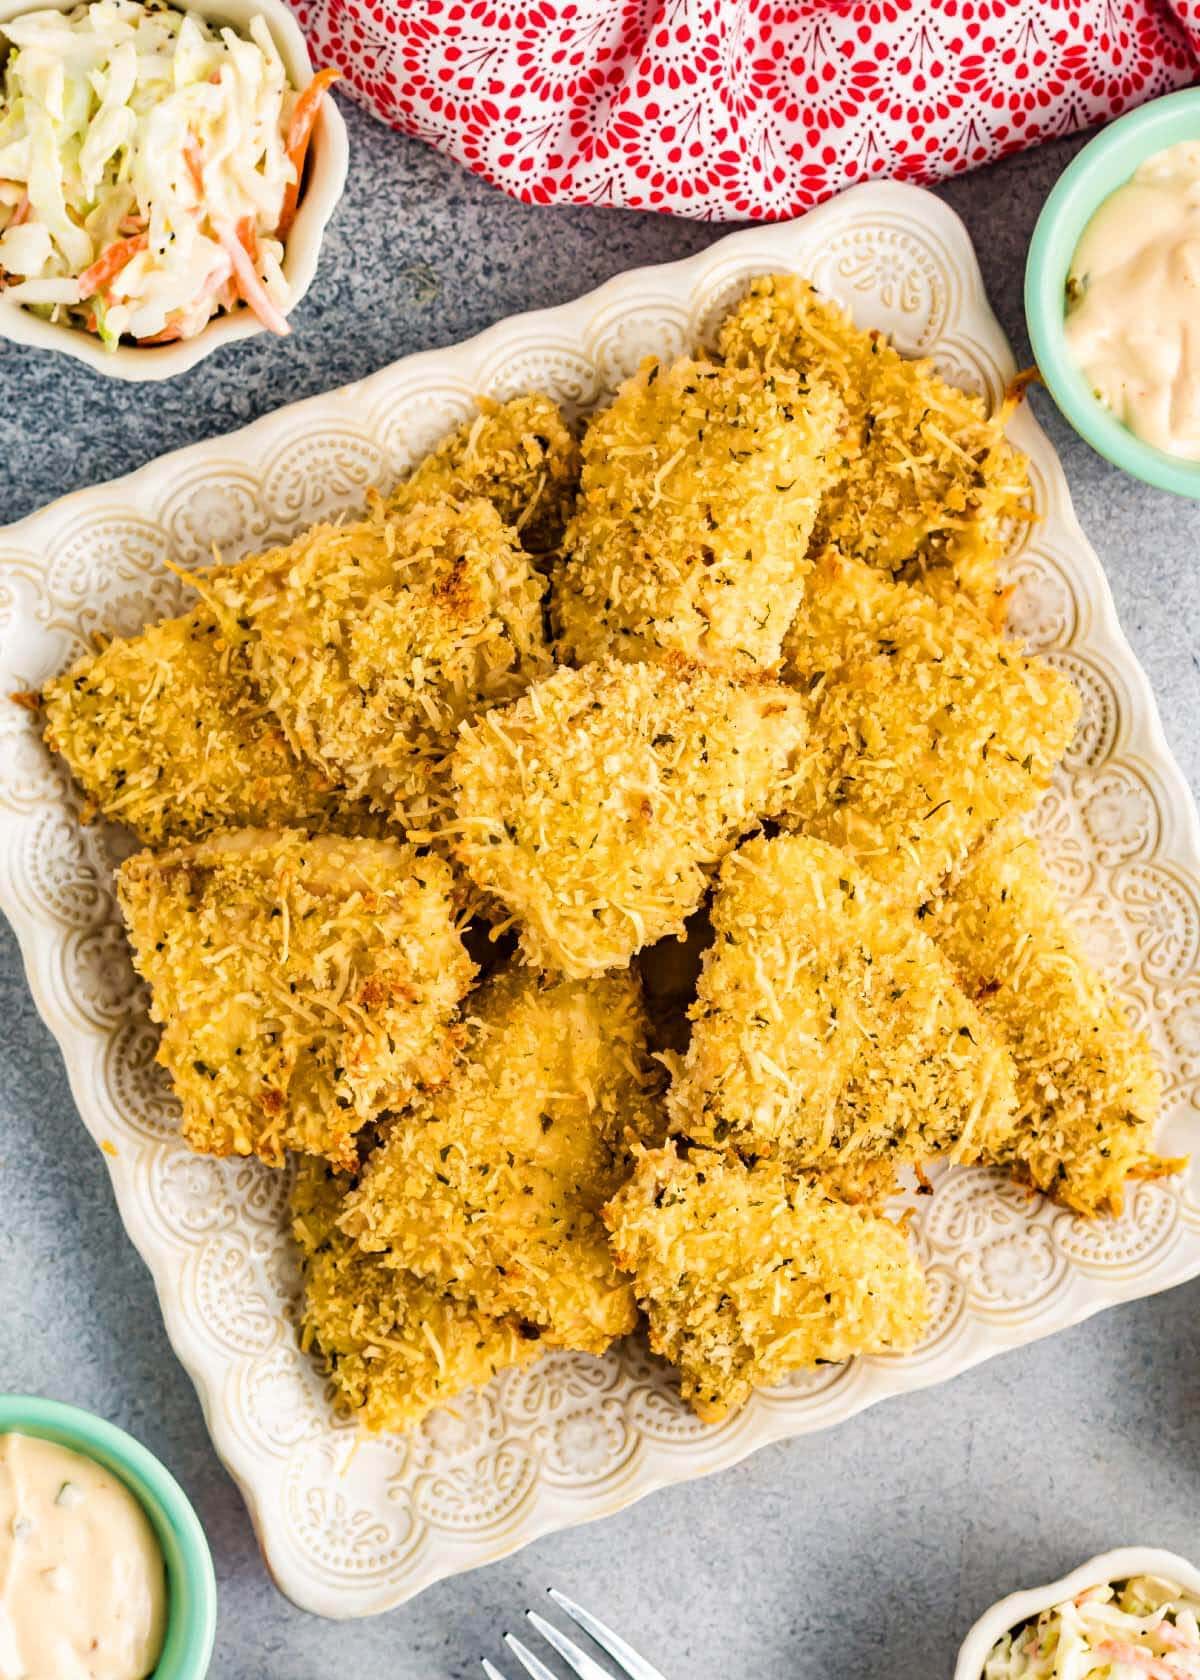 Baked Parmesan Crusted Fish pieces on a square plate